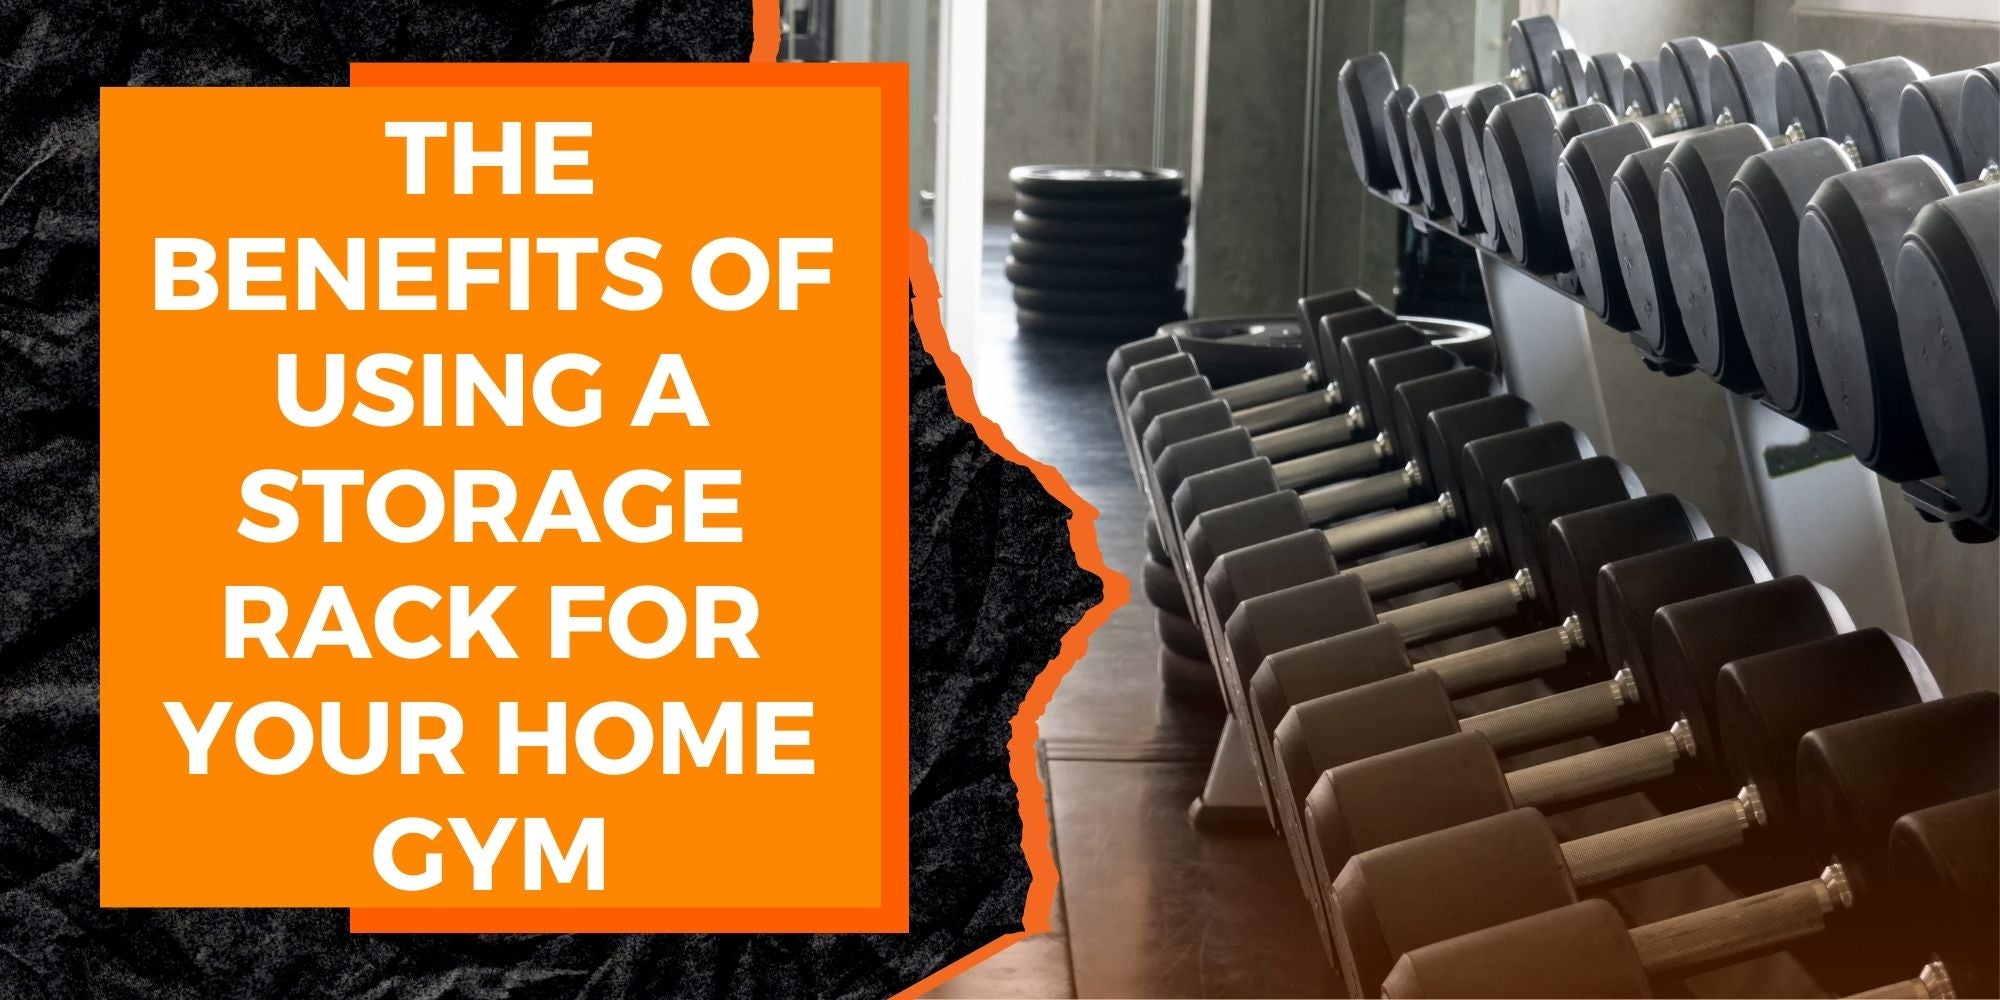 The Benefits of Using a Storage Rack for Your Home Gym